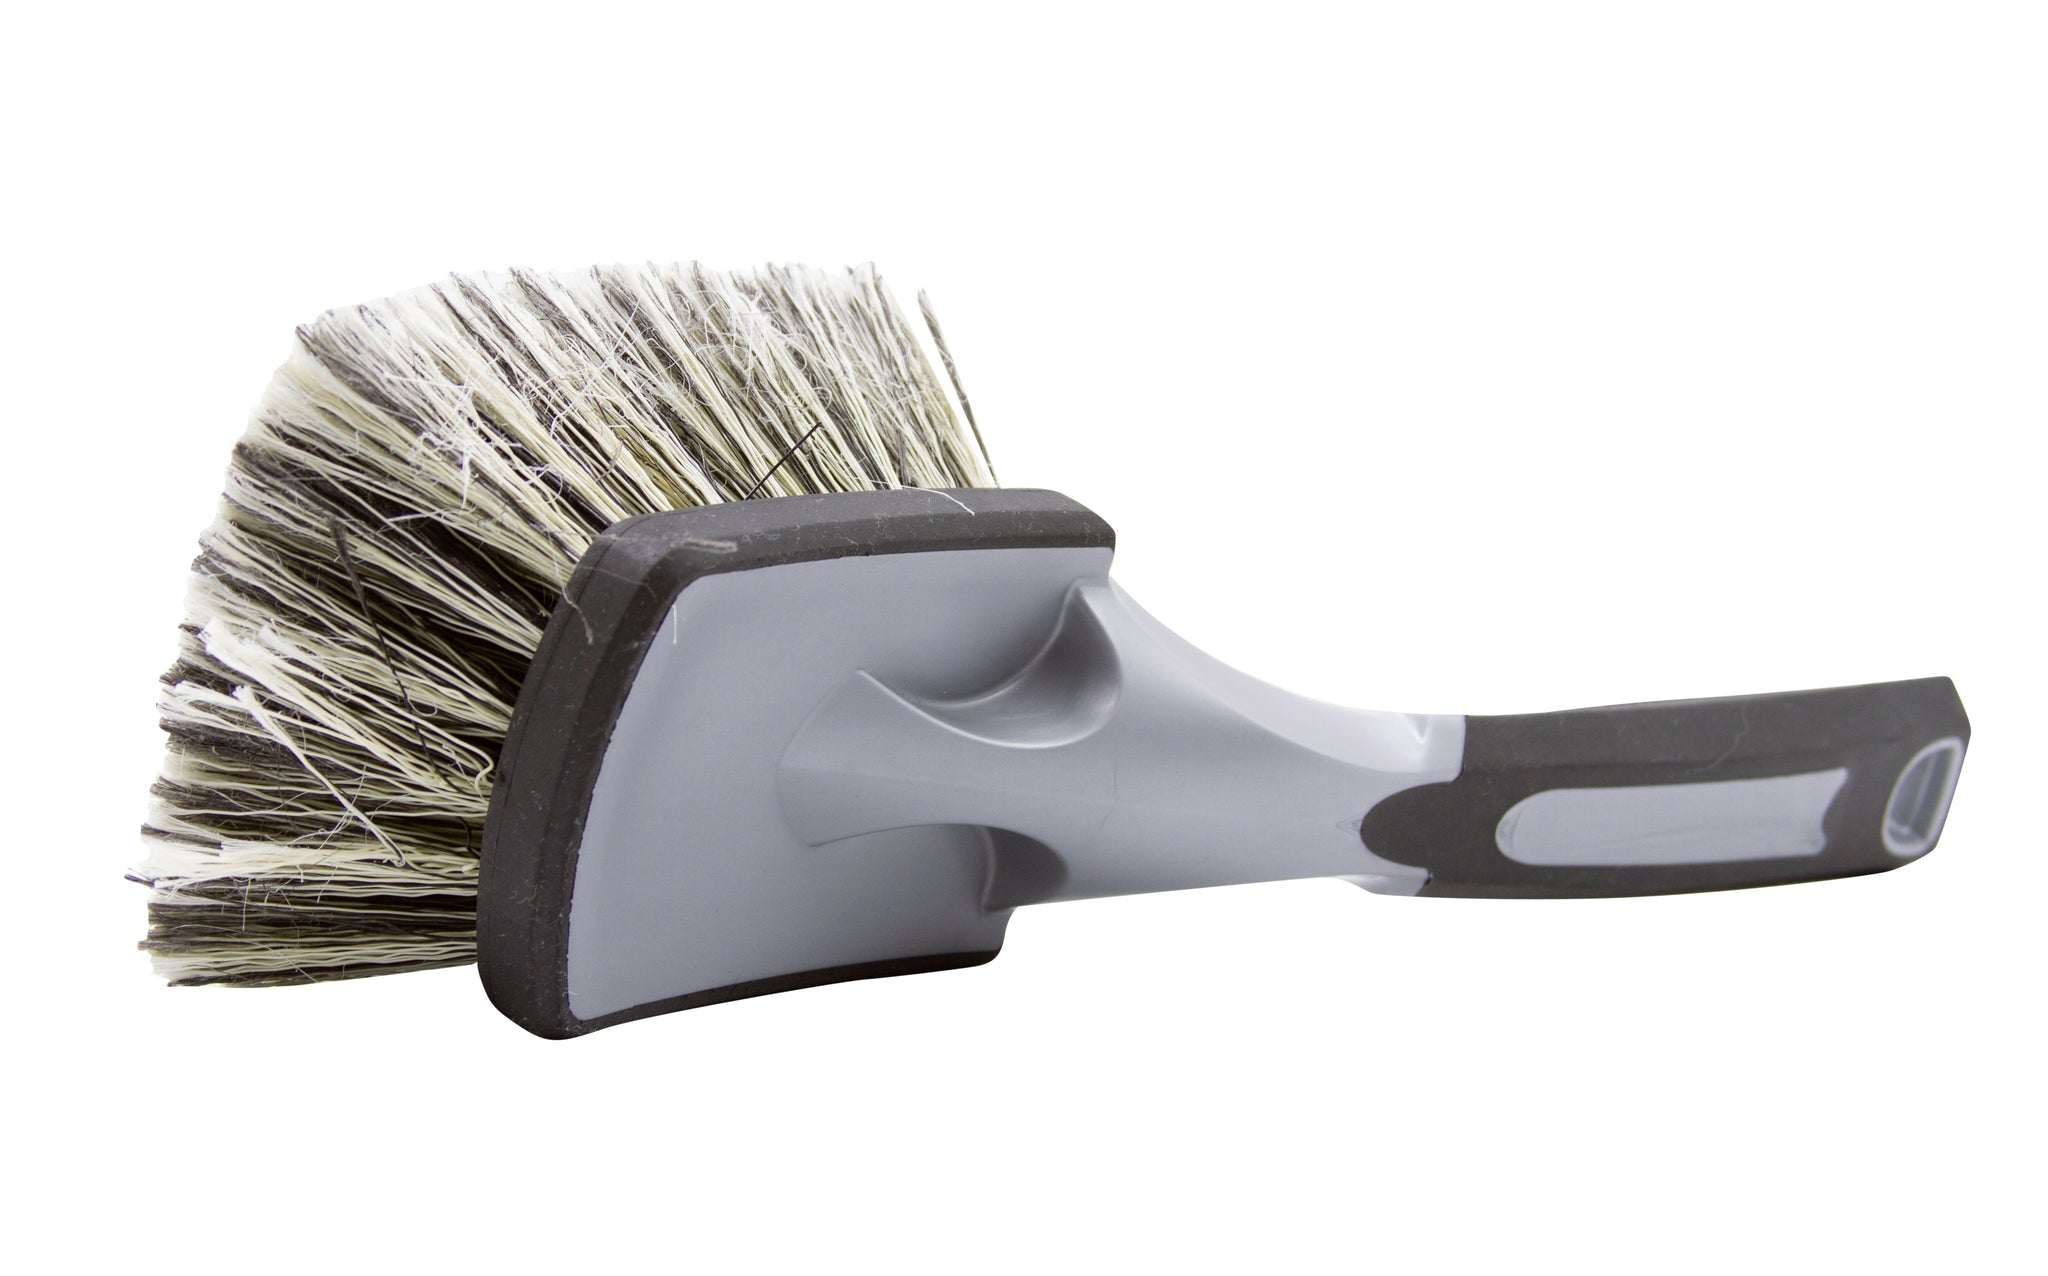 Heavy-Duty Wheel and Carpet Cleaning Brush - Detailing Brushes